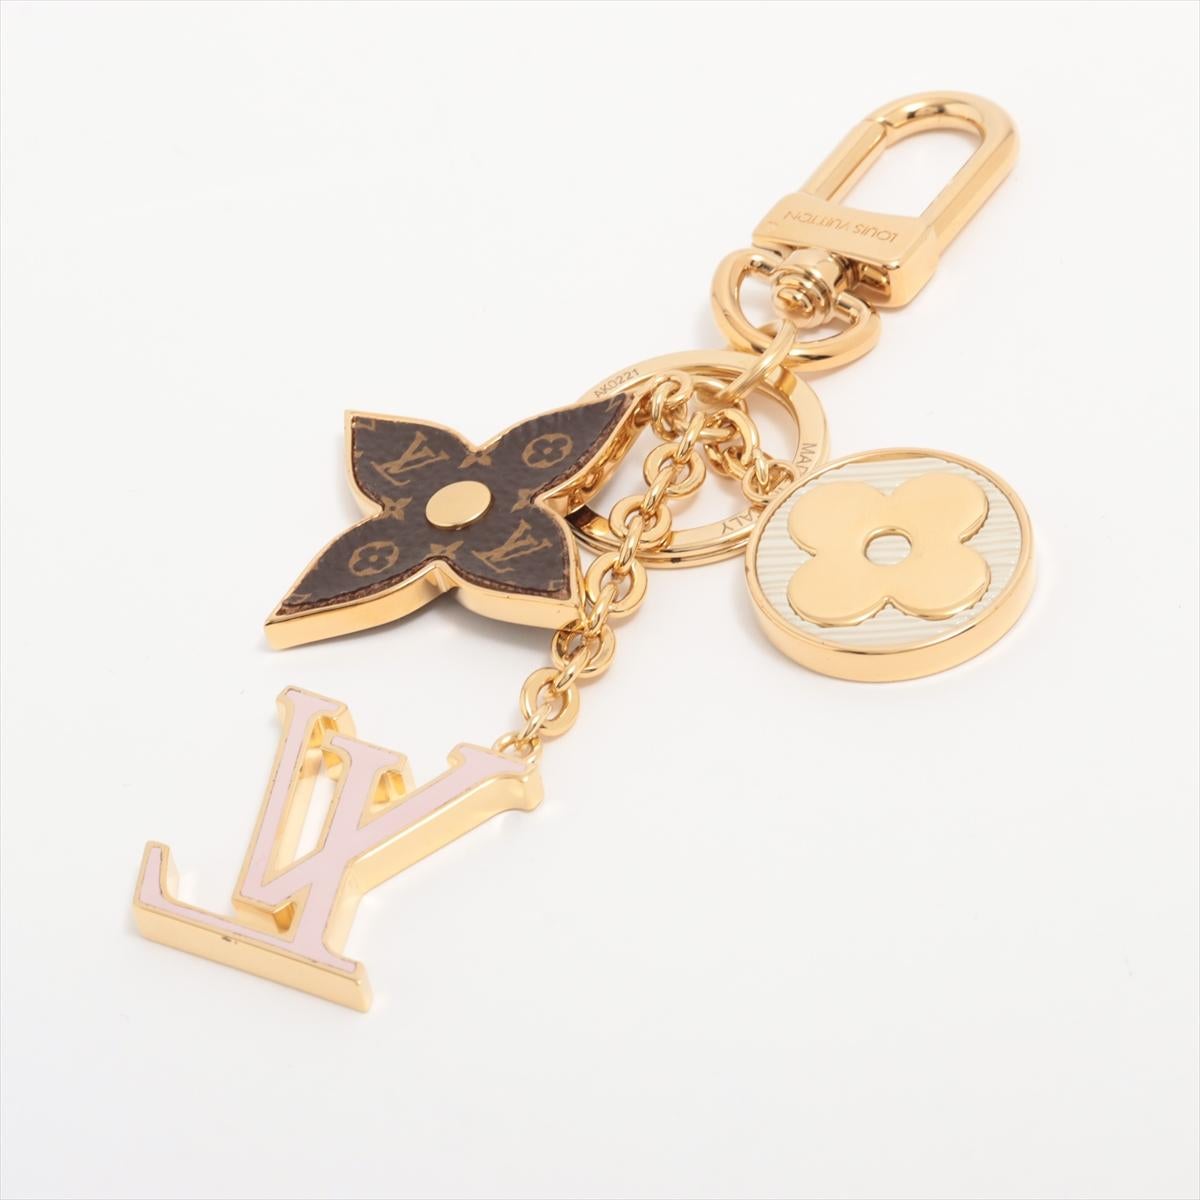 Louis Vuitton Spring Street Bag Charm In Good Condition For Sale In Indianapolis, IN